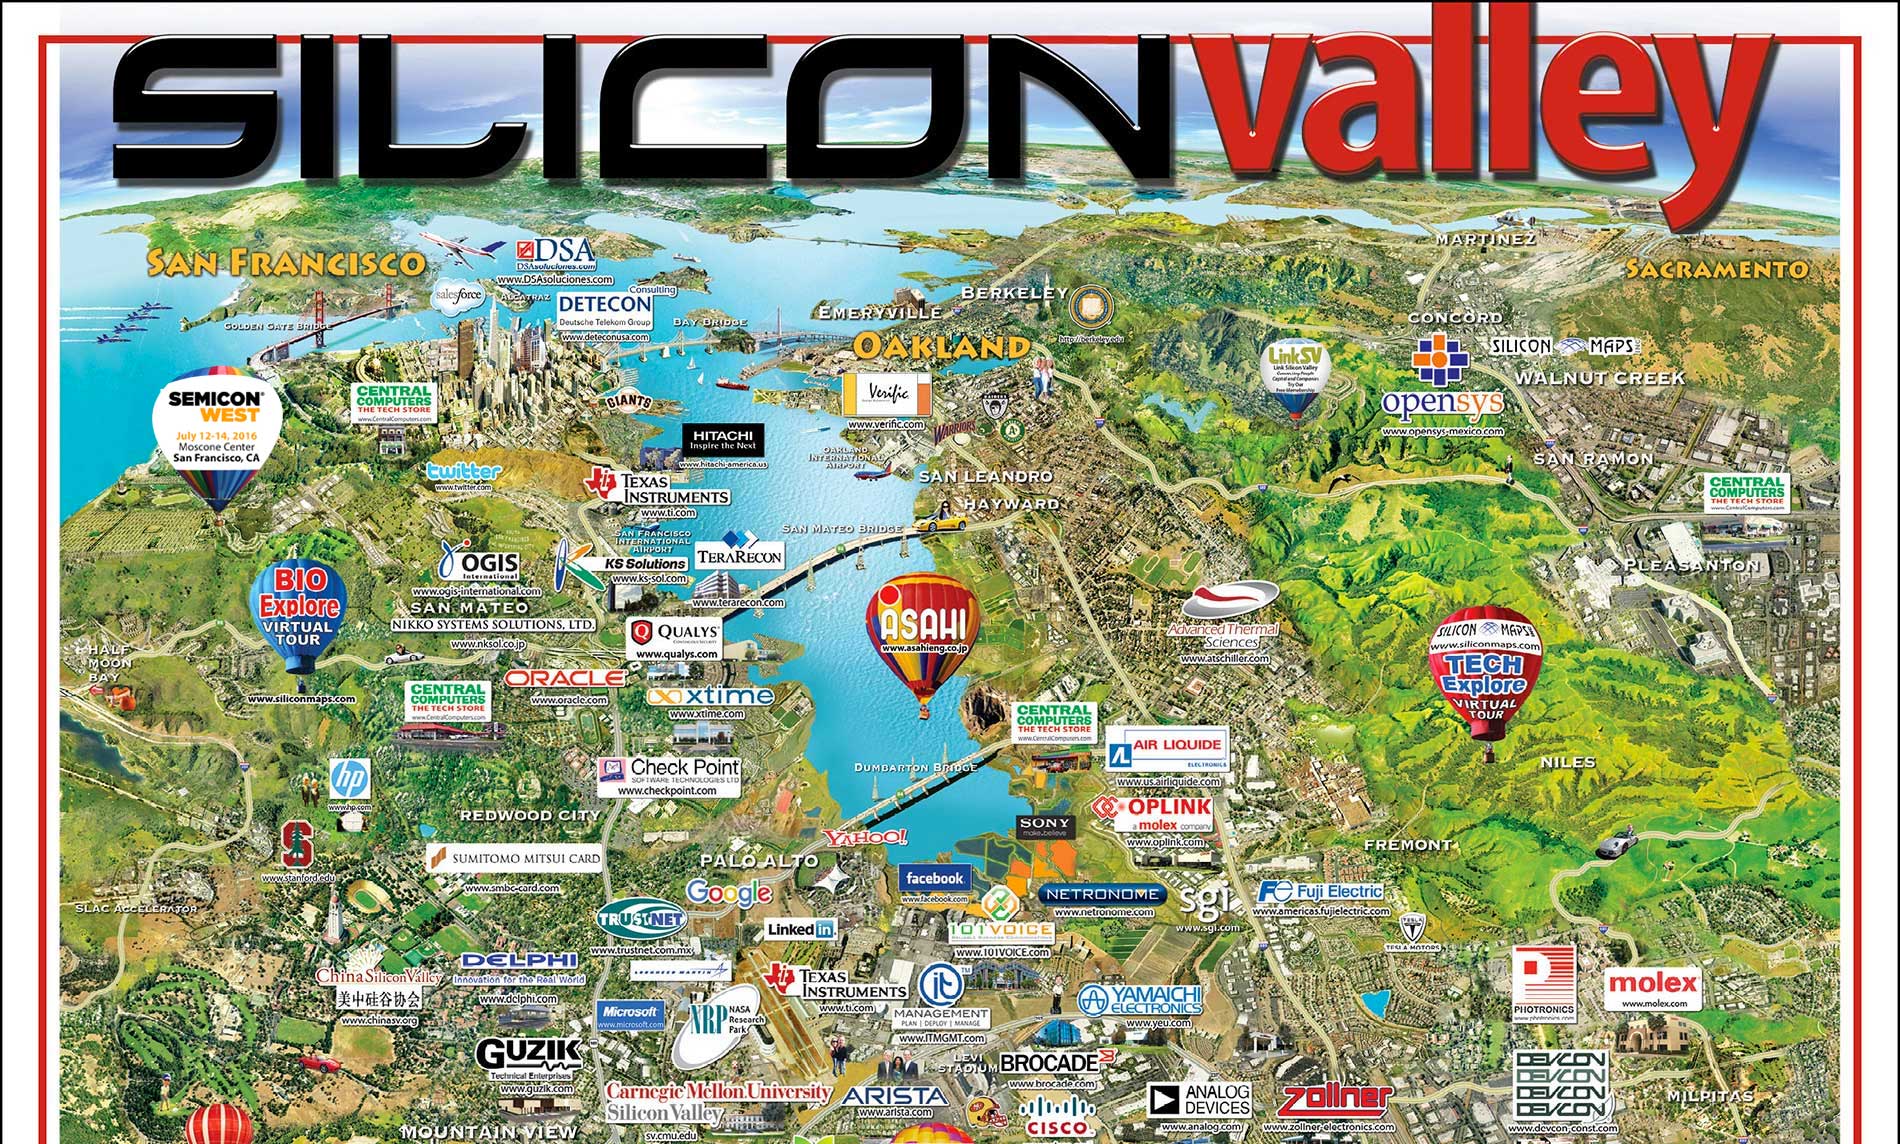 High Resolution Wallpaper | Silicon Valley 1900x1144 px